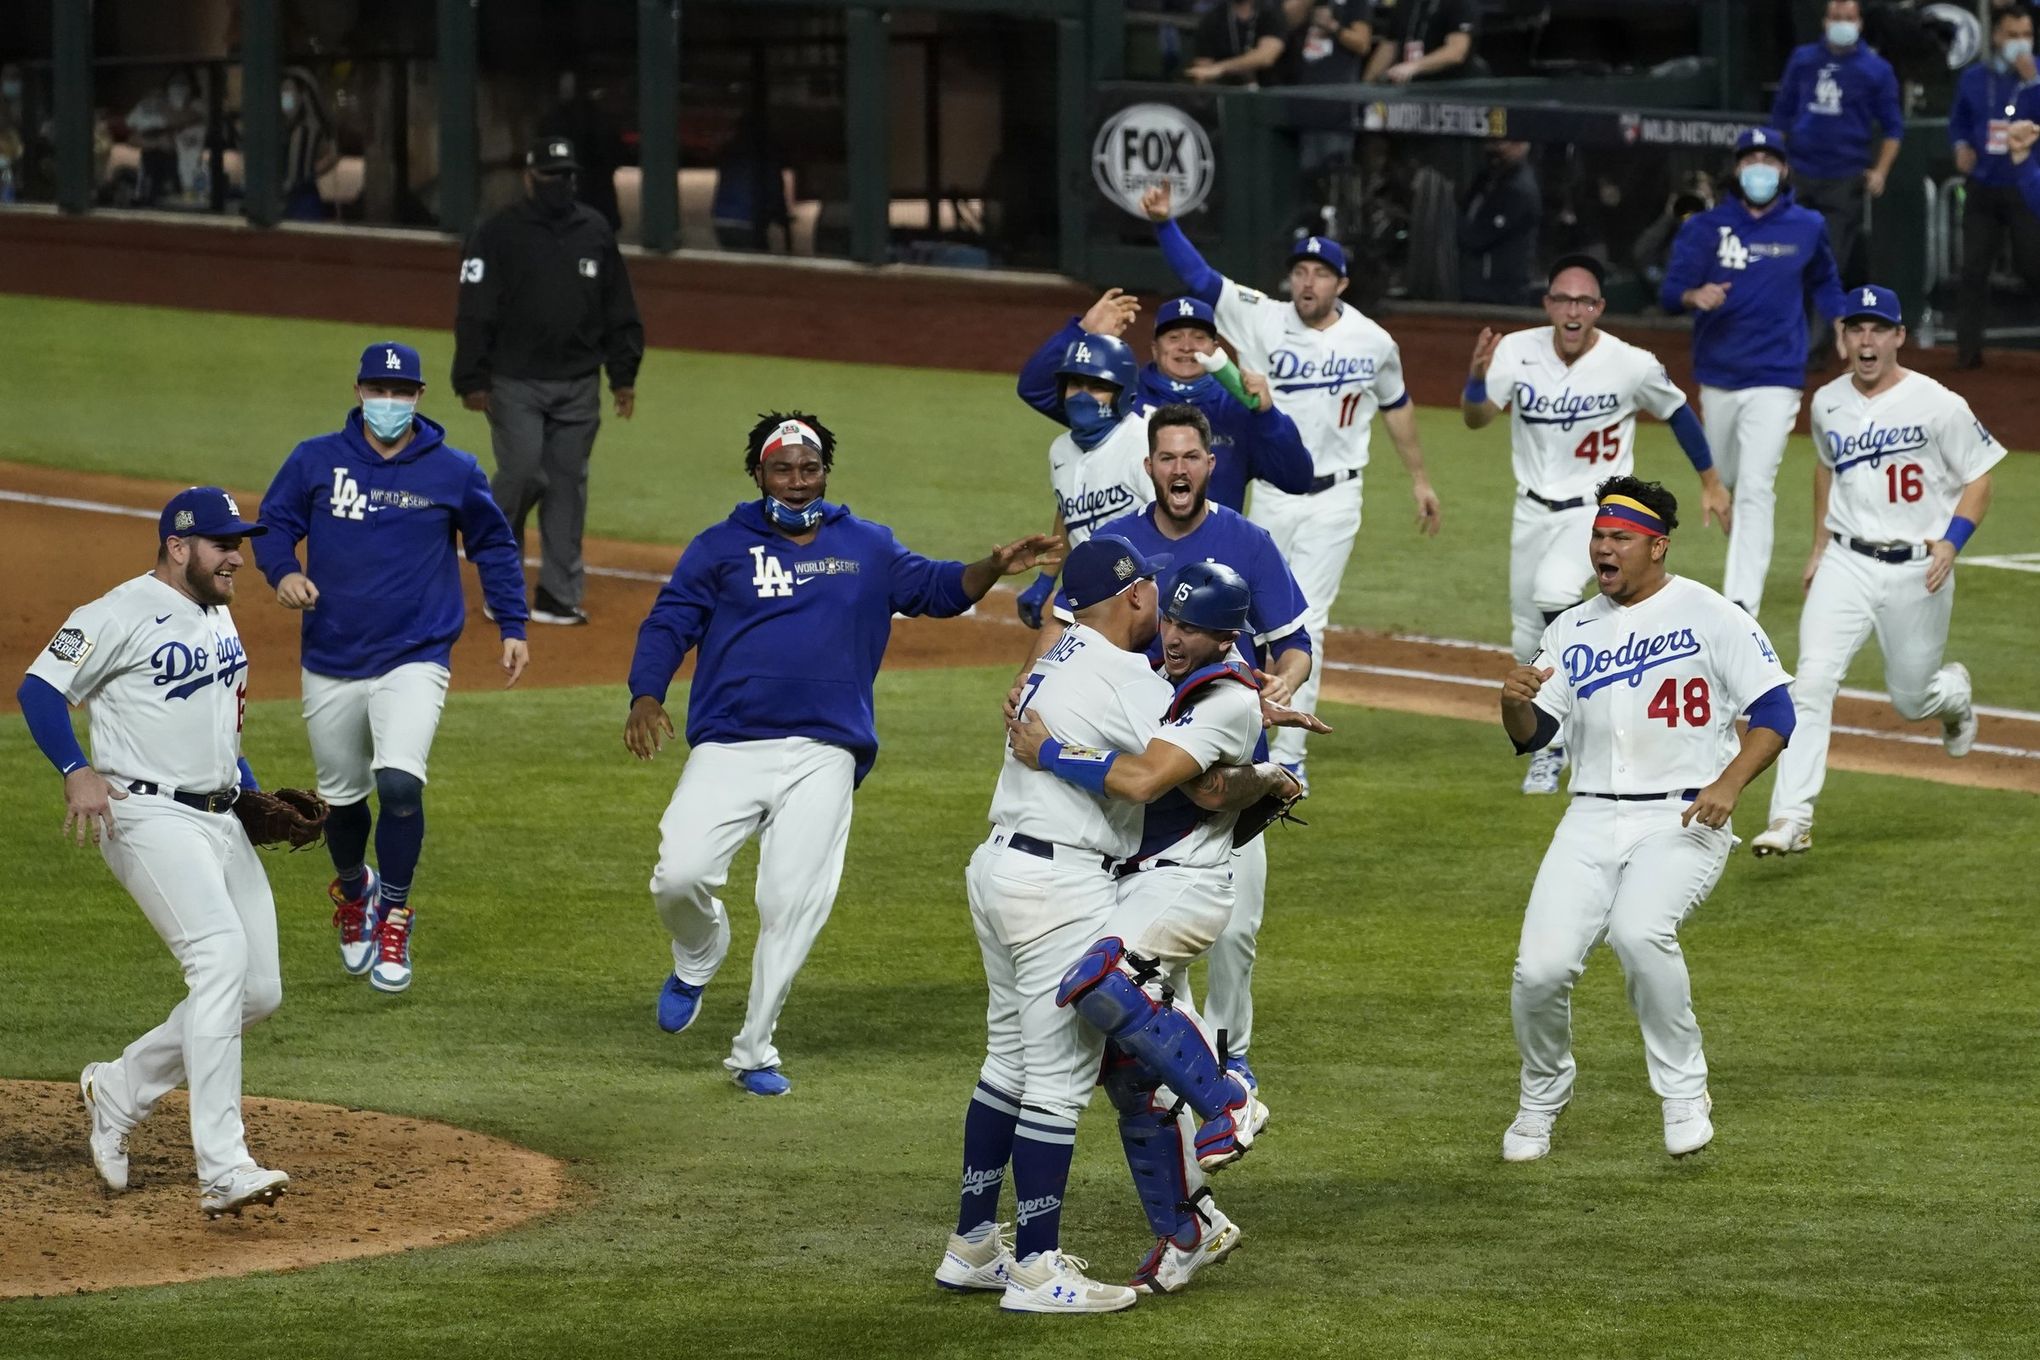 Dodgers win 2020 World Series! (Final out of World Series Game 6!) 